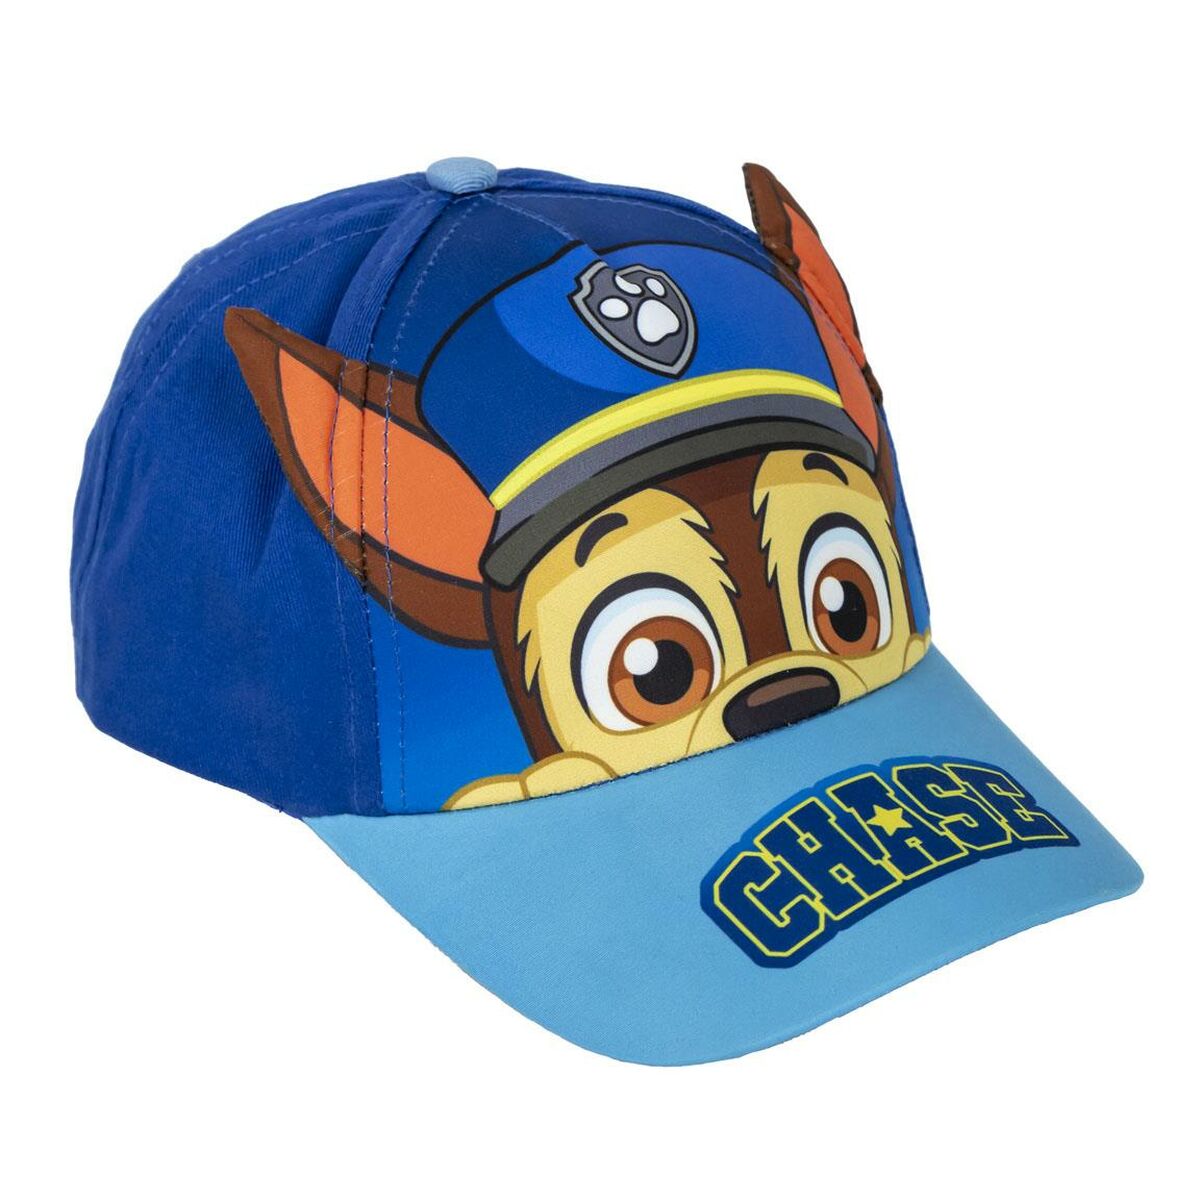 Child Cap with Ears The Paw Patrol Blue